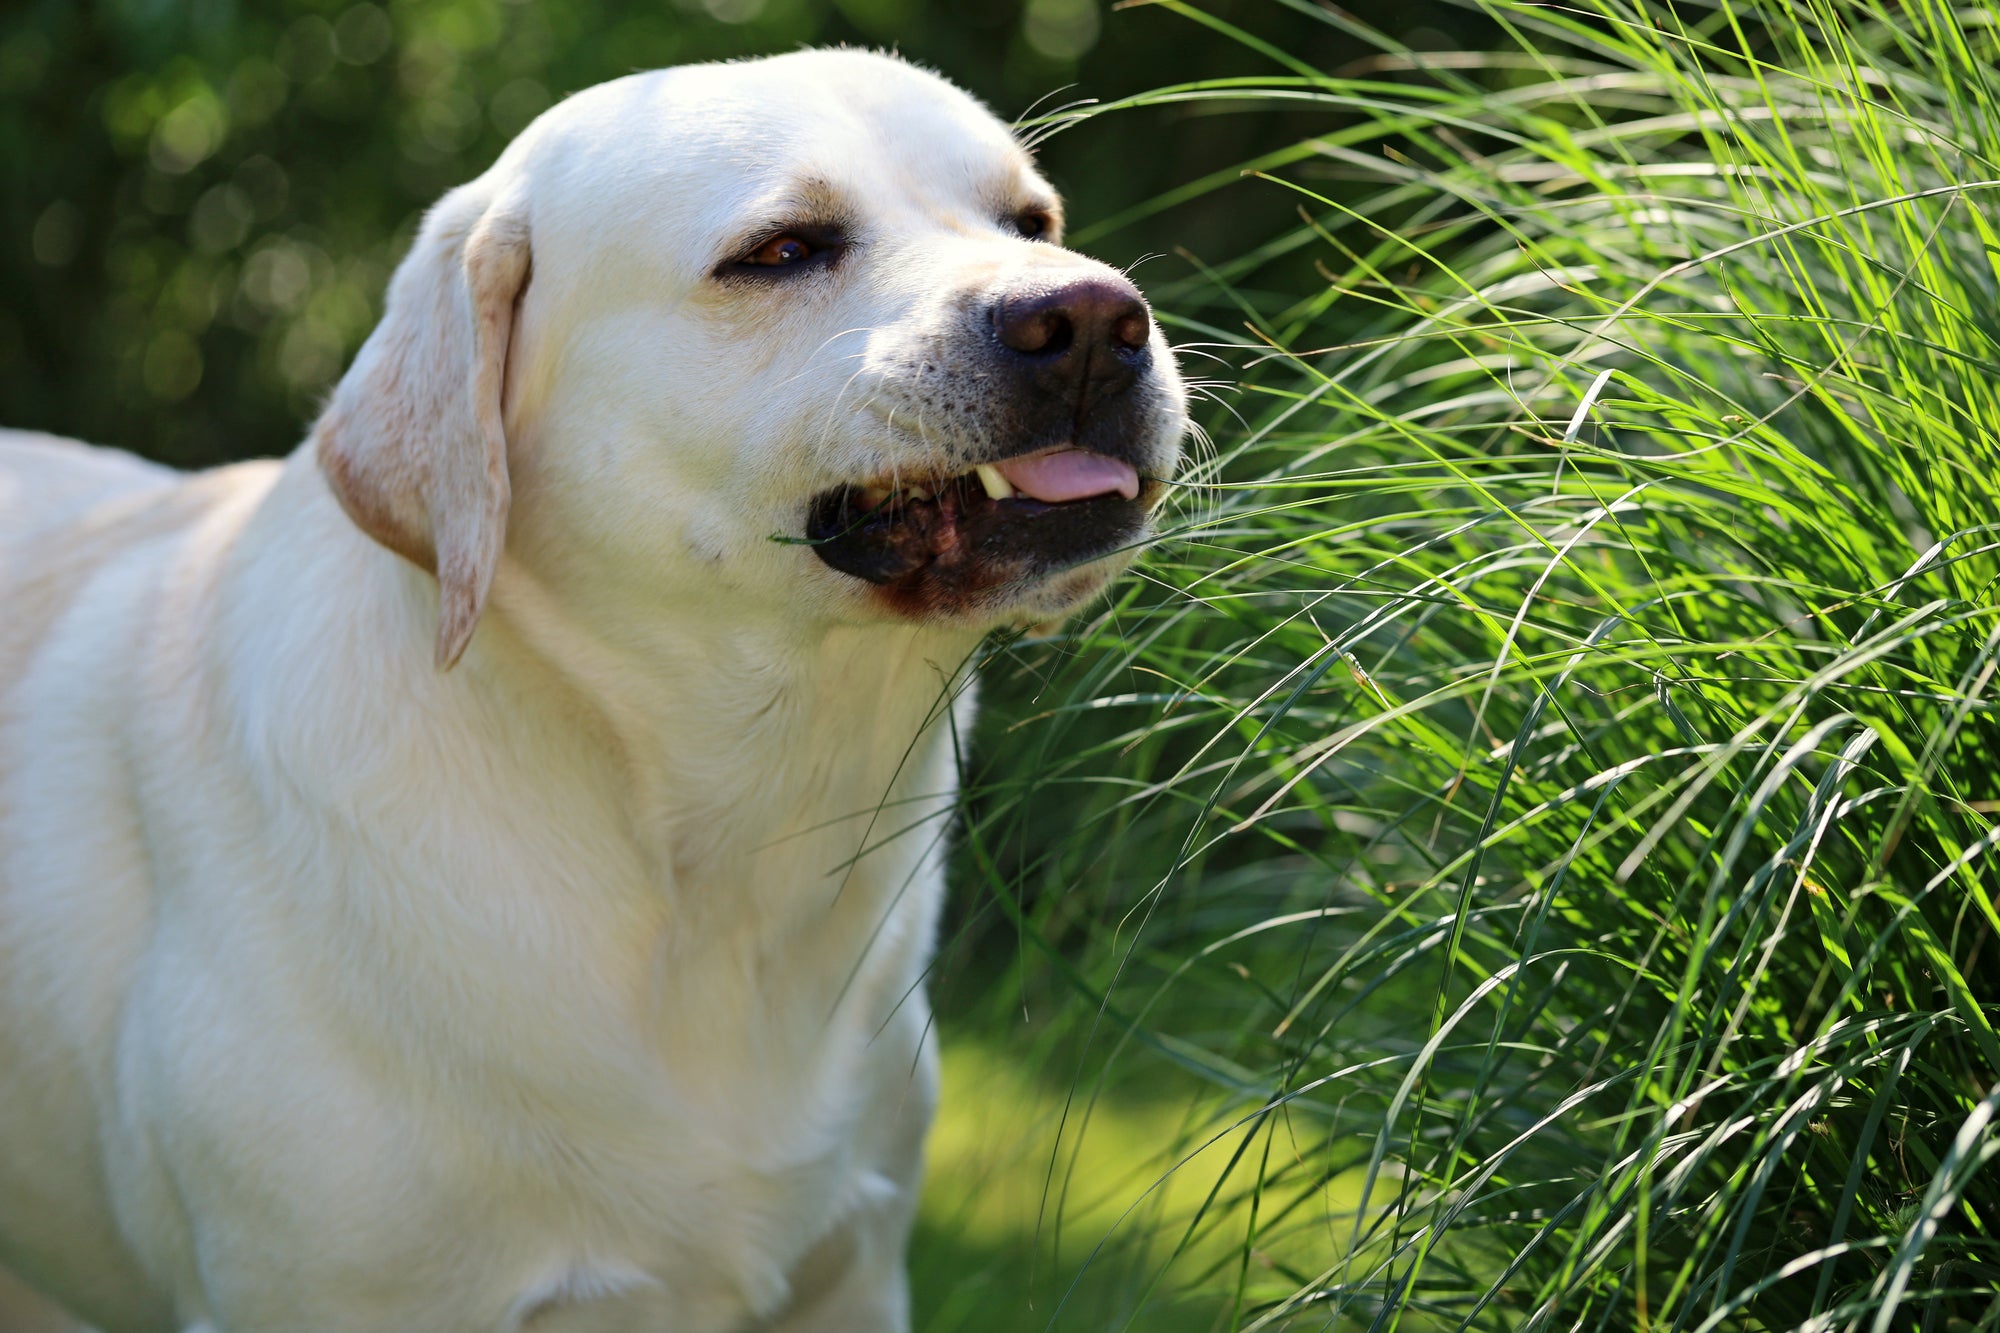 Why Is My Dog Eating Grass And Should I Stop It?